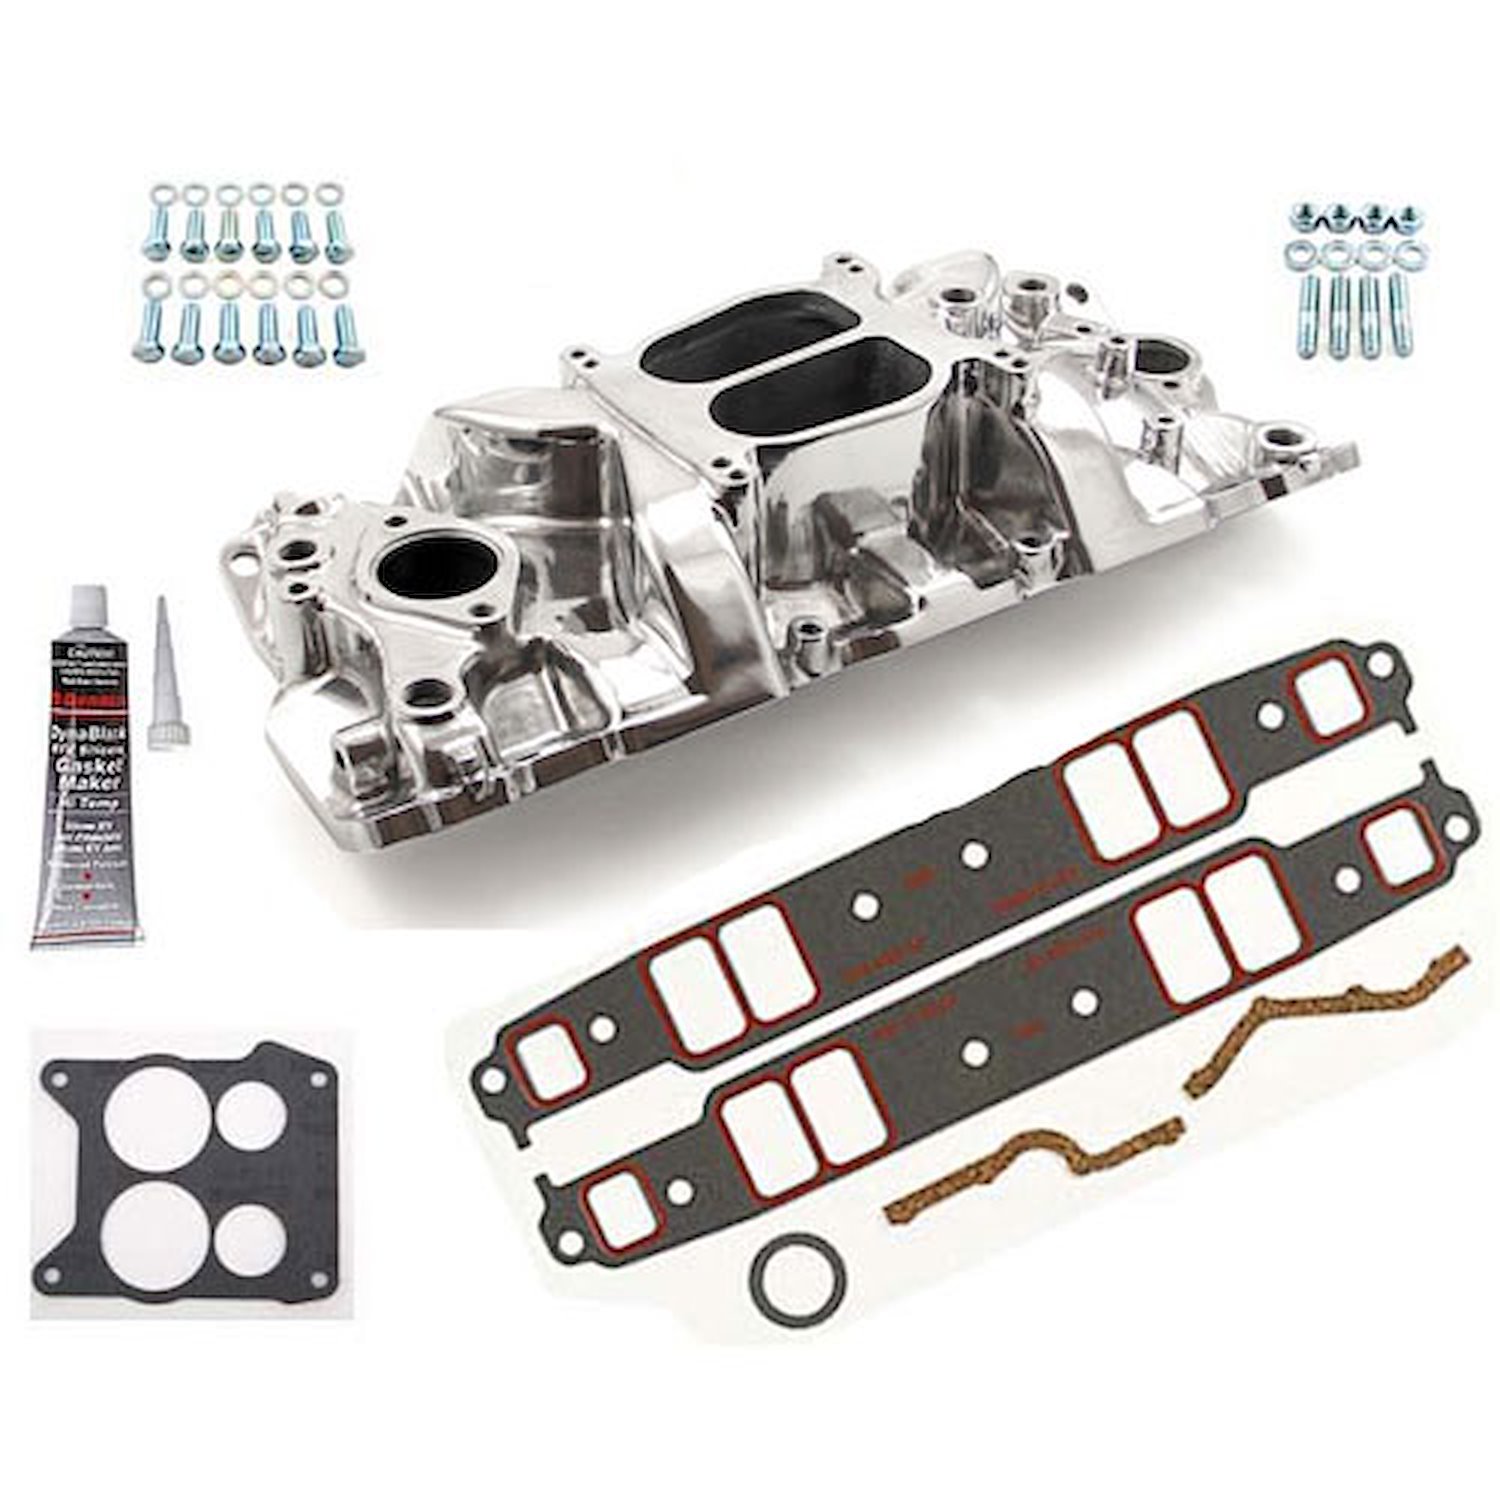 Holeshot Intake Kit 1957-95 Small Block Chevy 350 Includes: